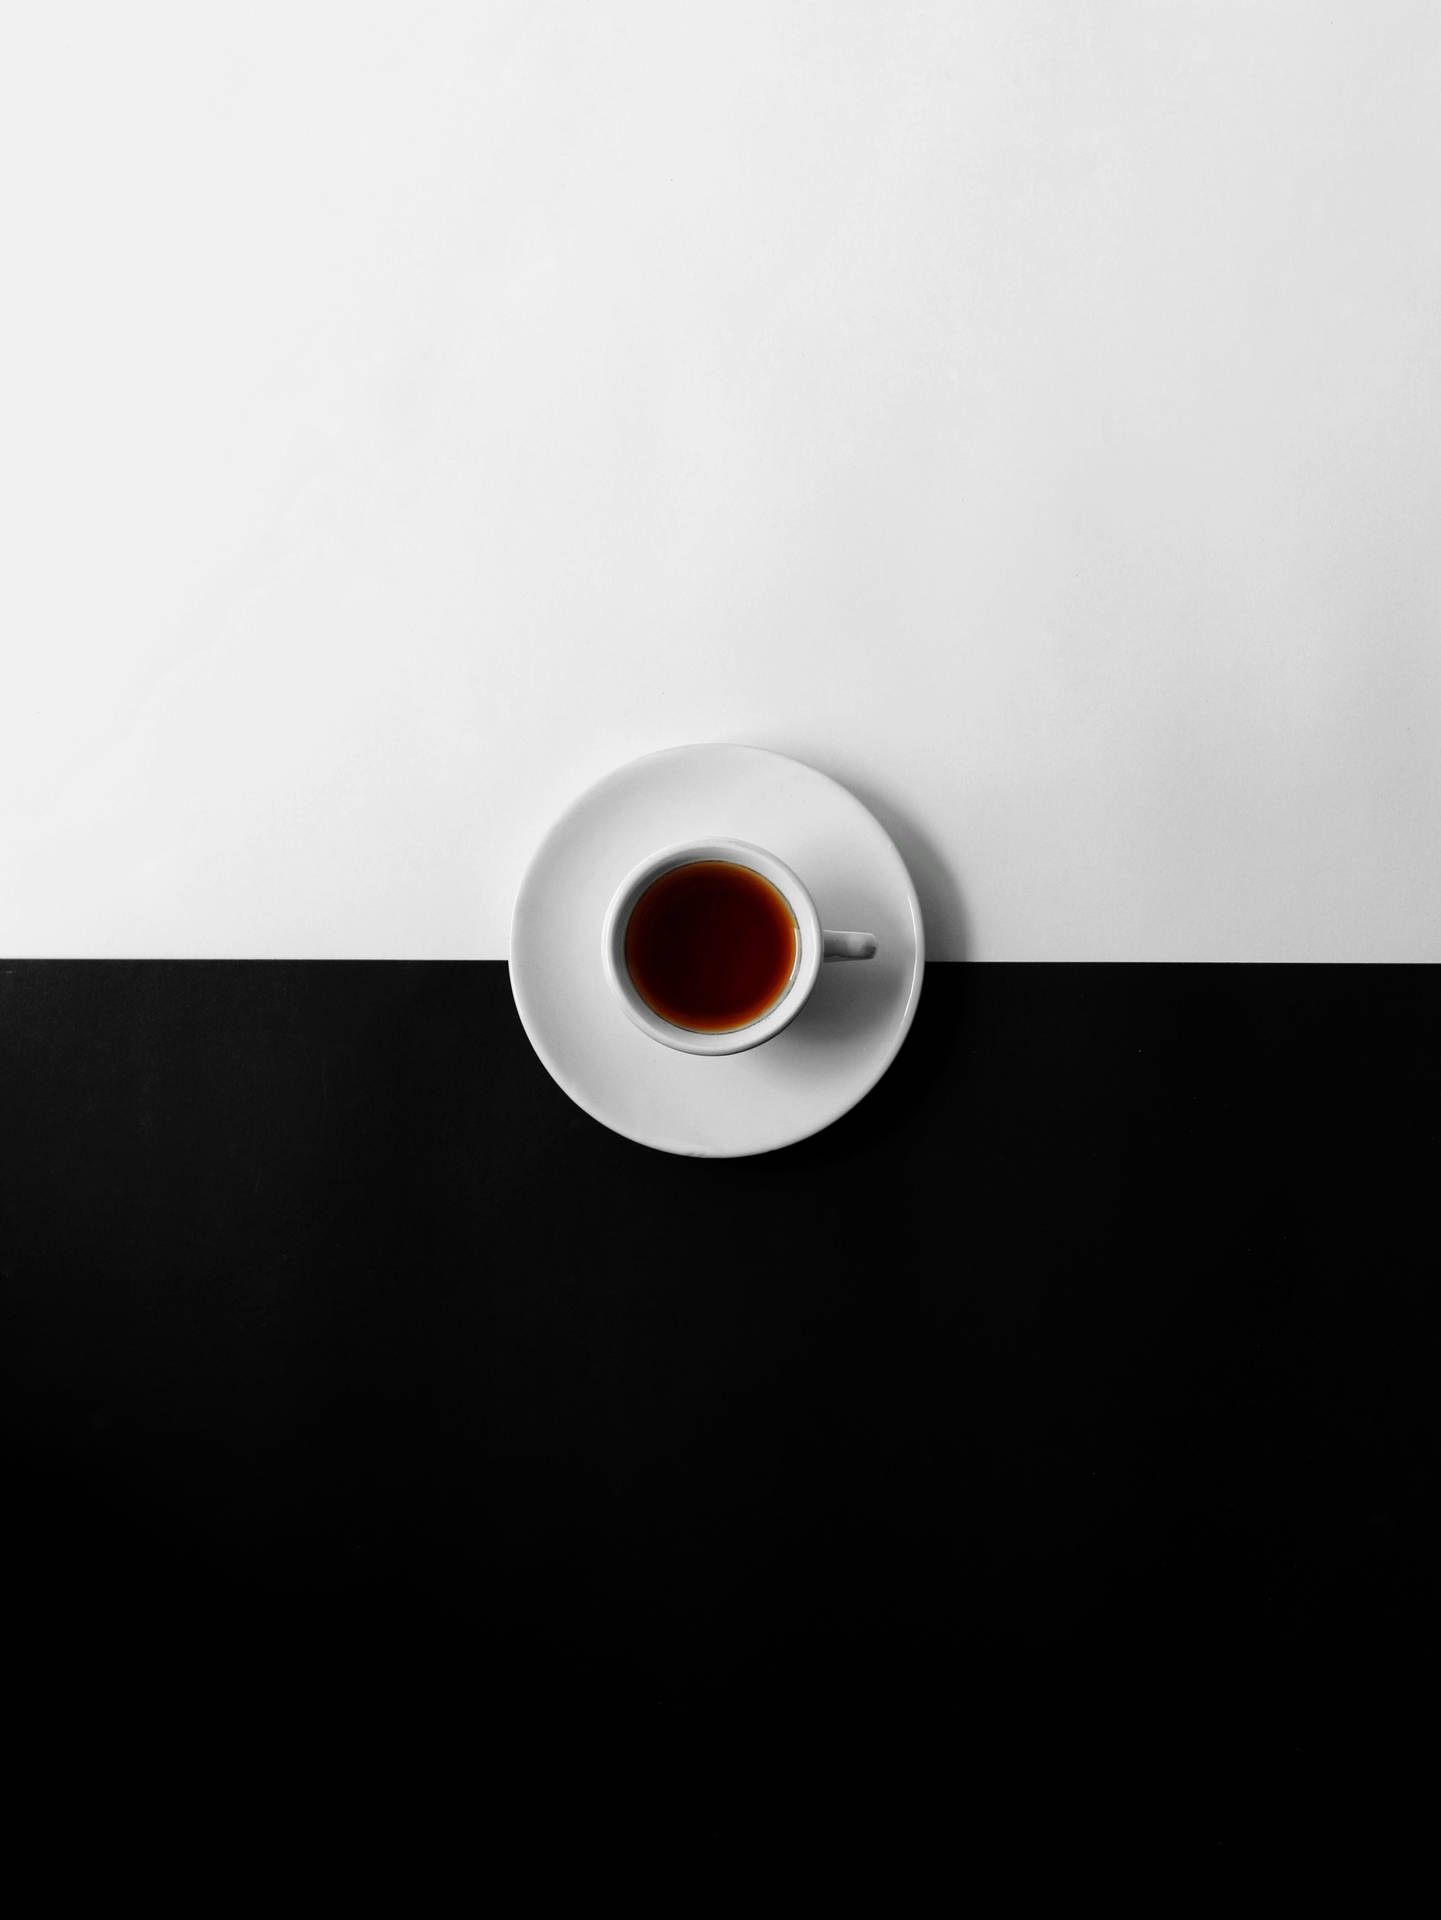 Minimalist Cup Of Coffee Background